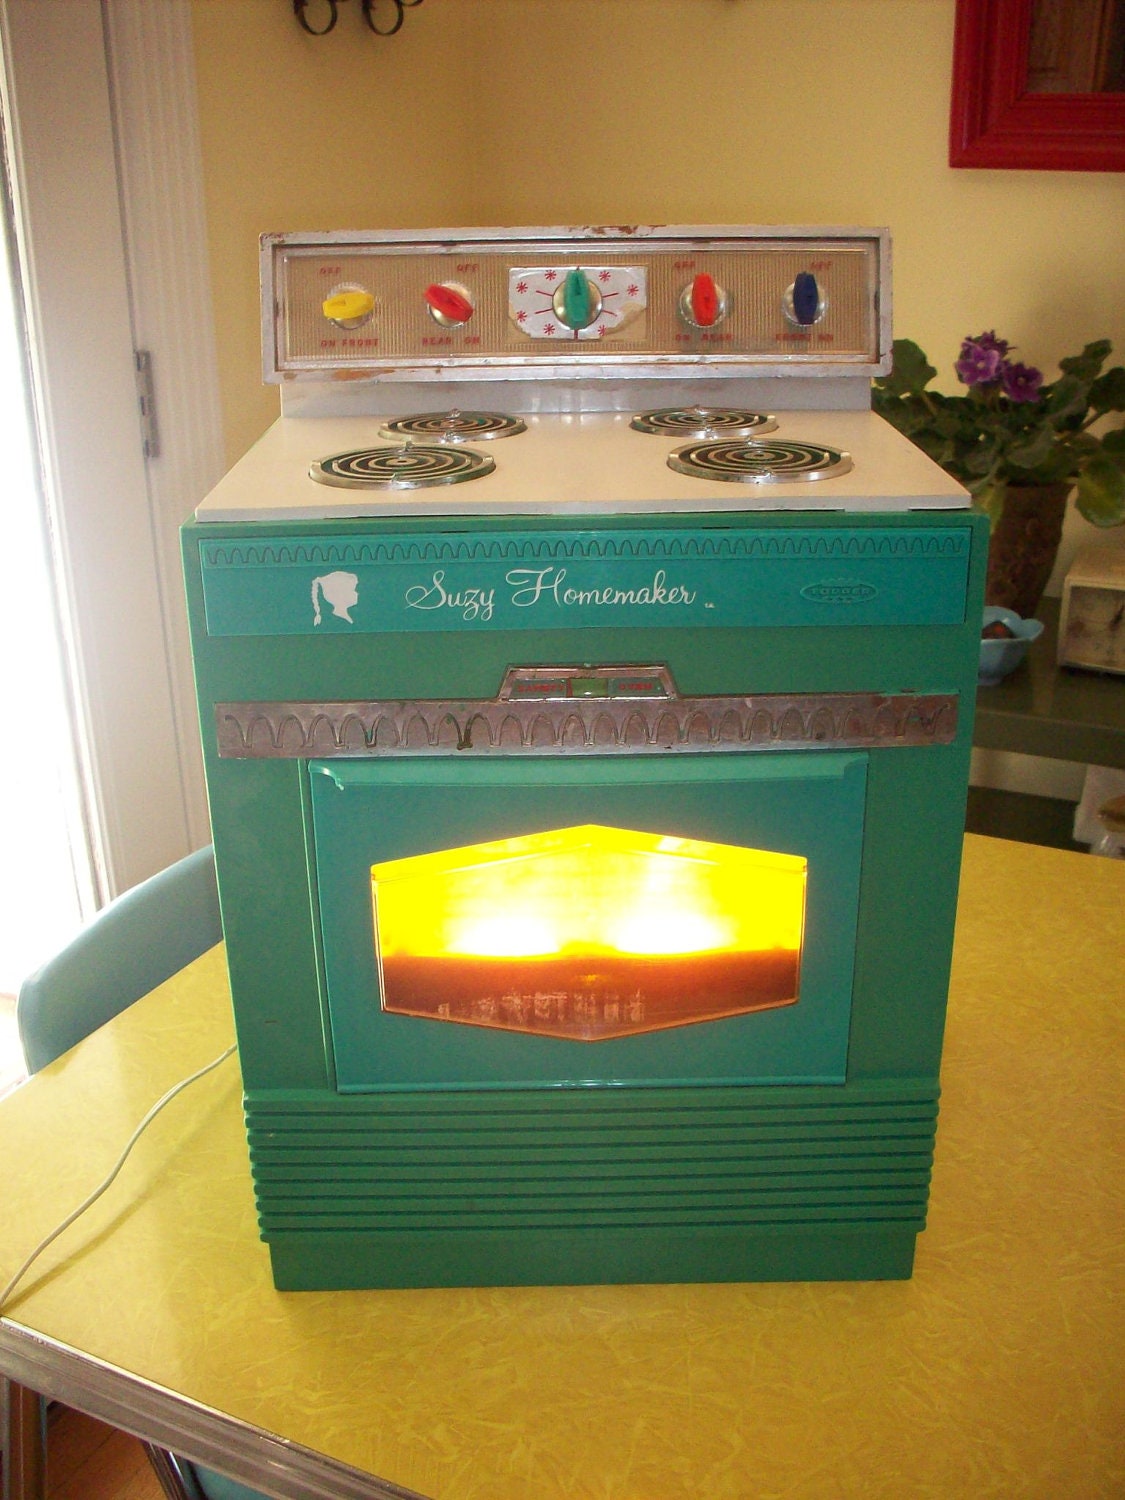 toy oven